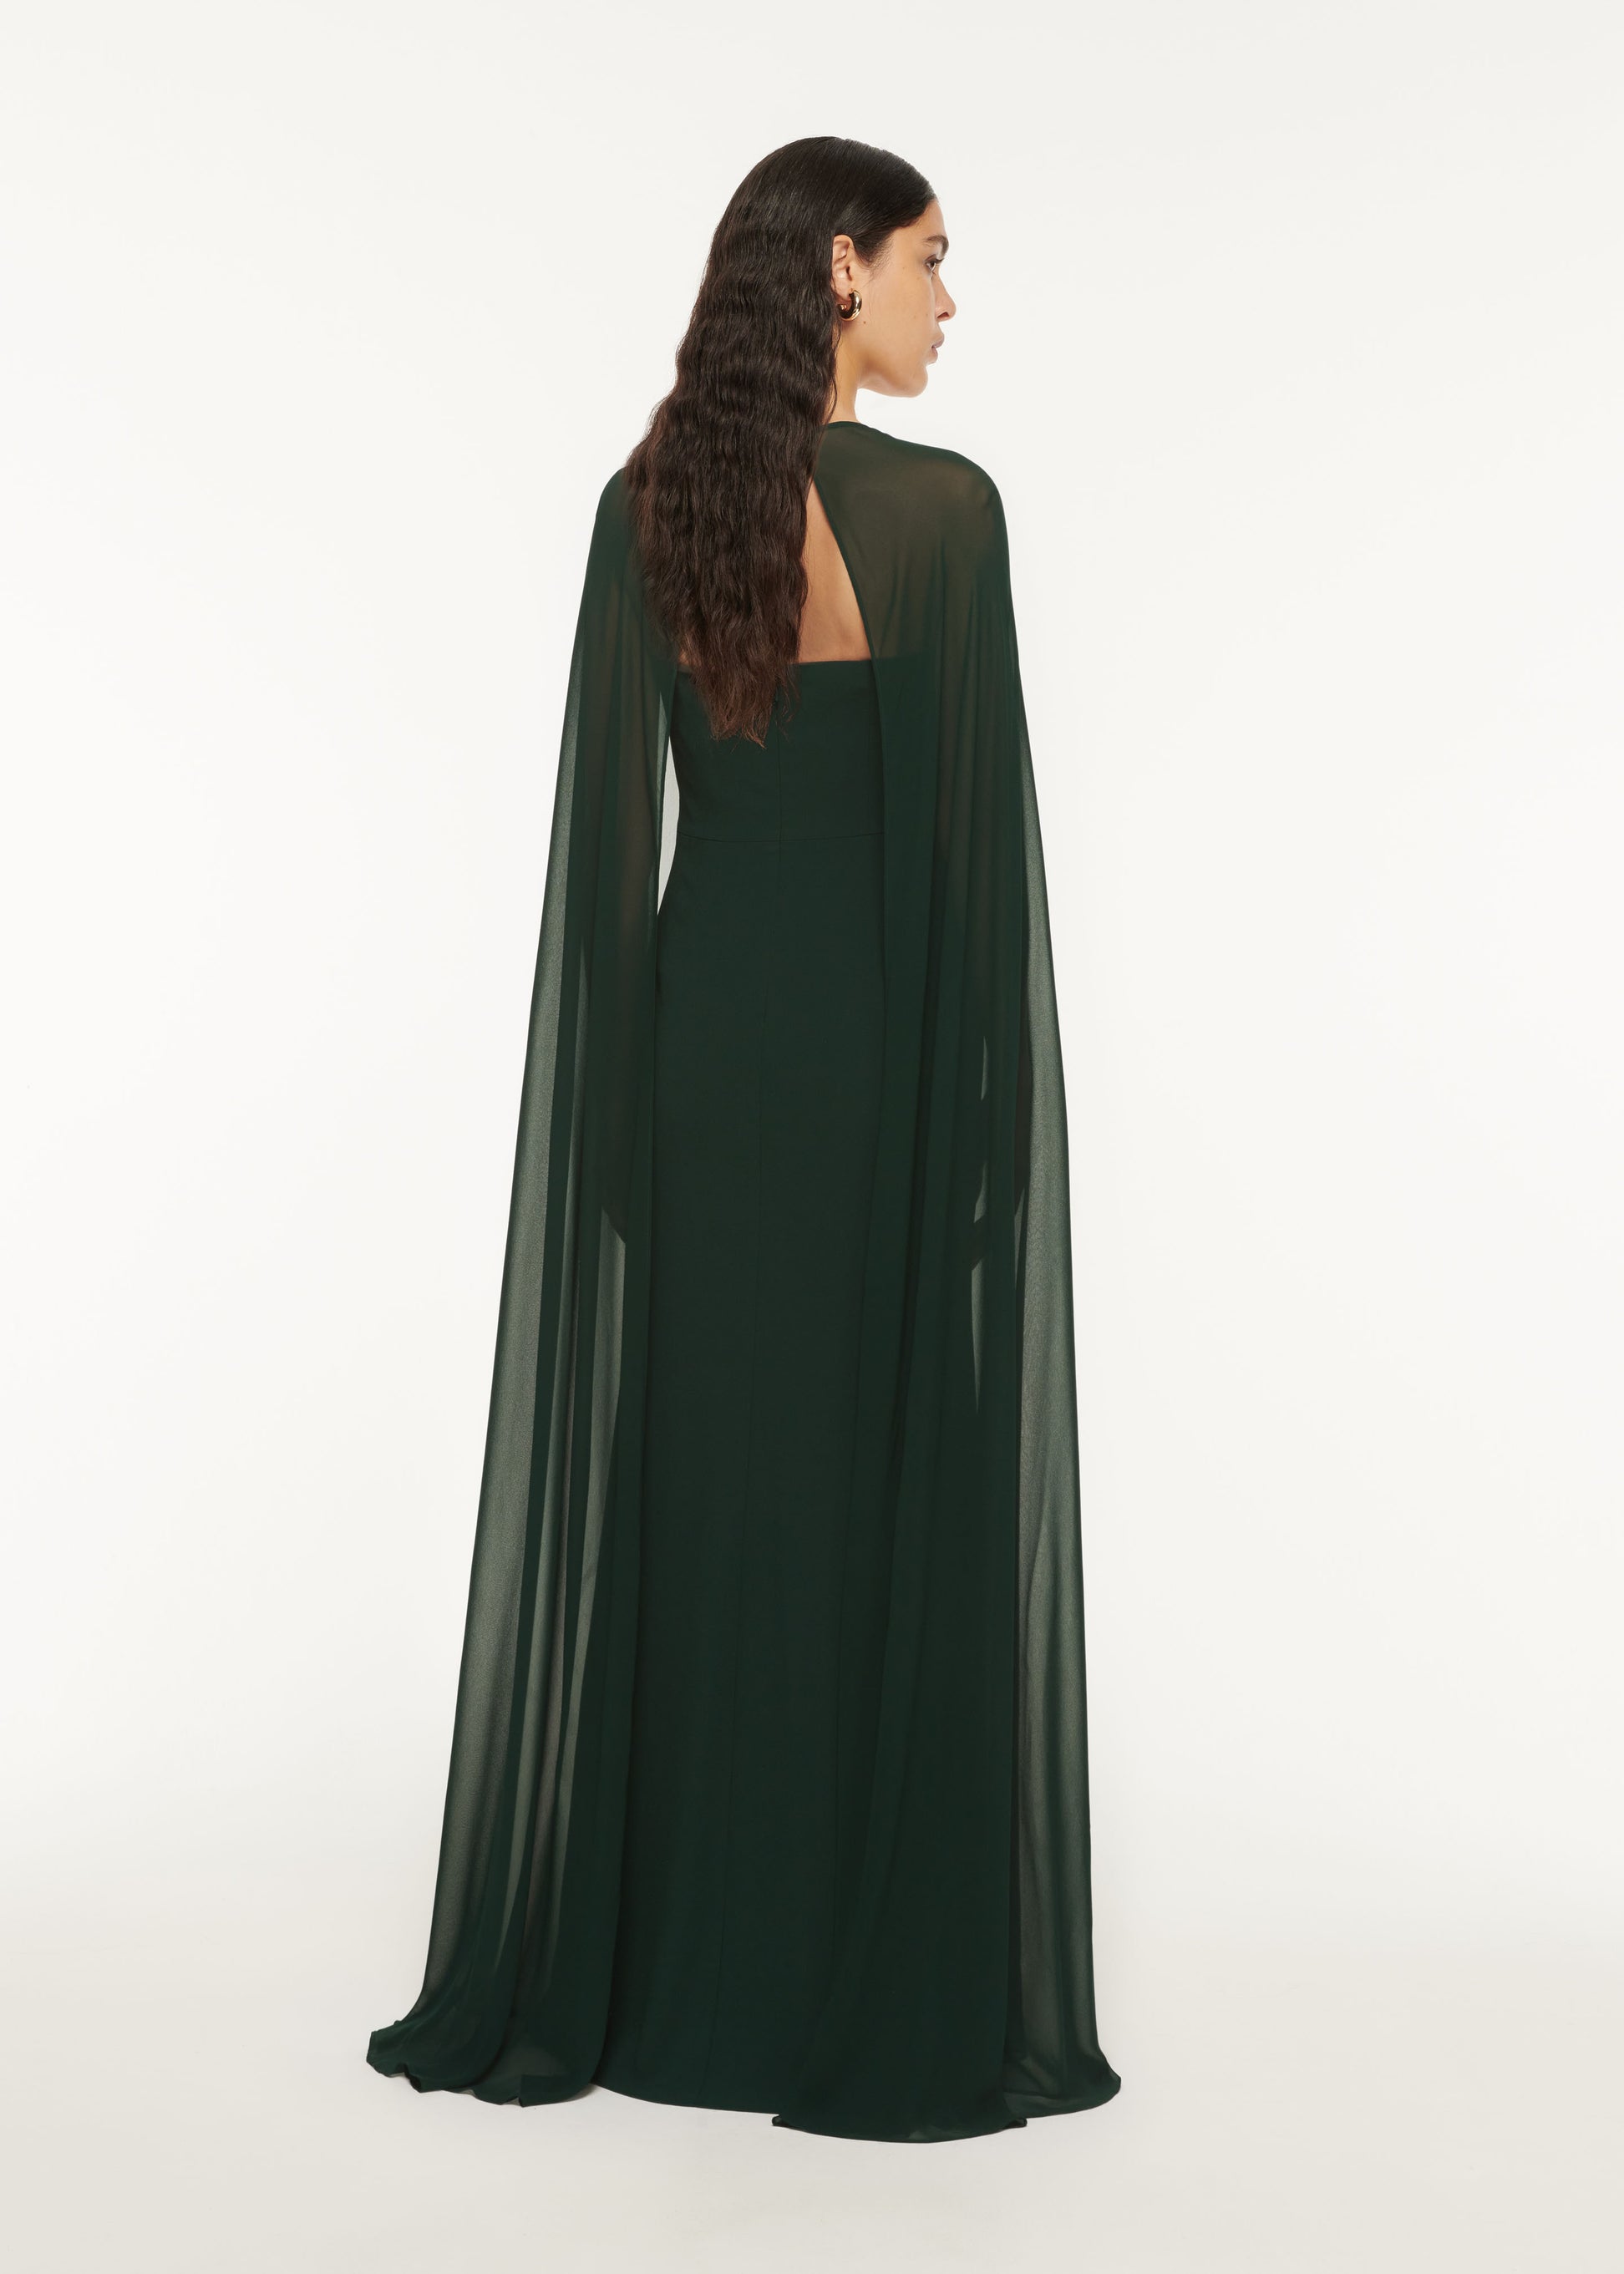 The back of a woman wearing the Strapless Satin Crepe Gown Green